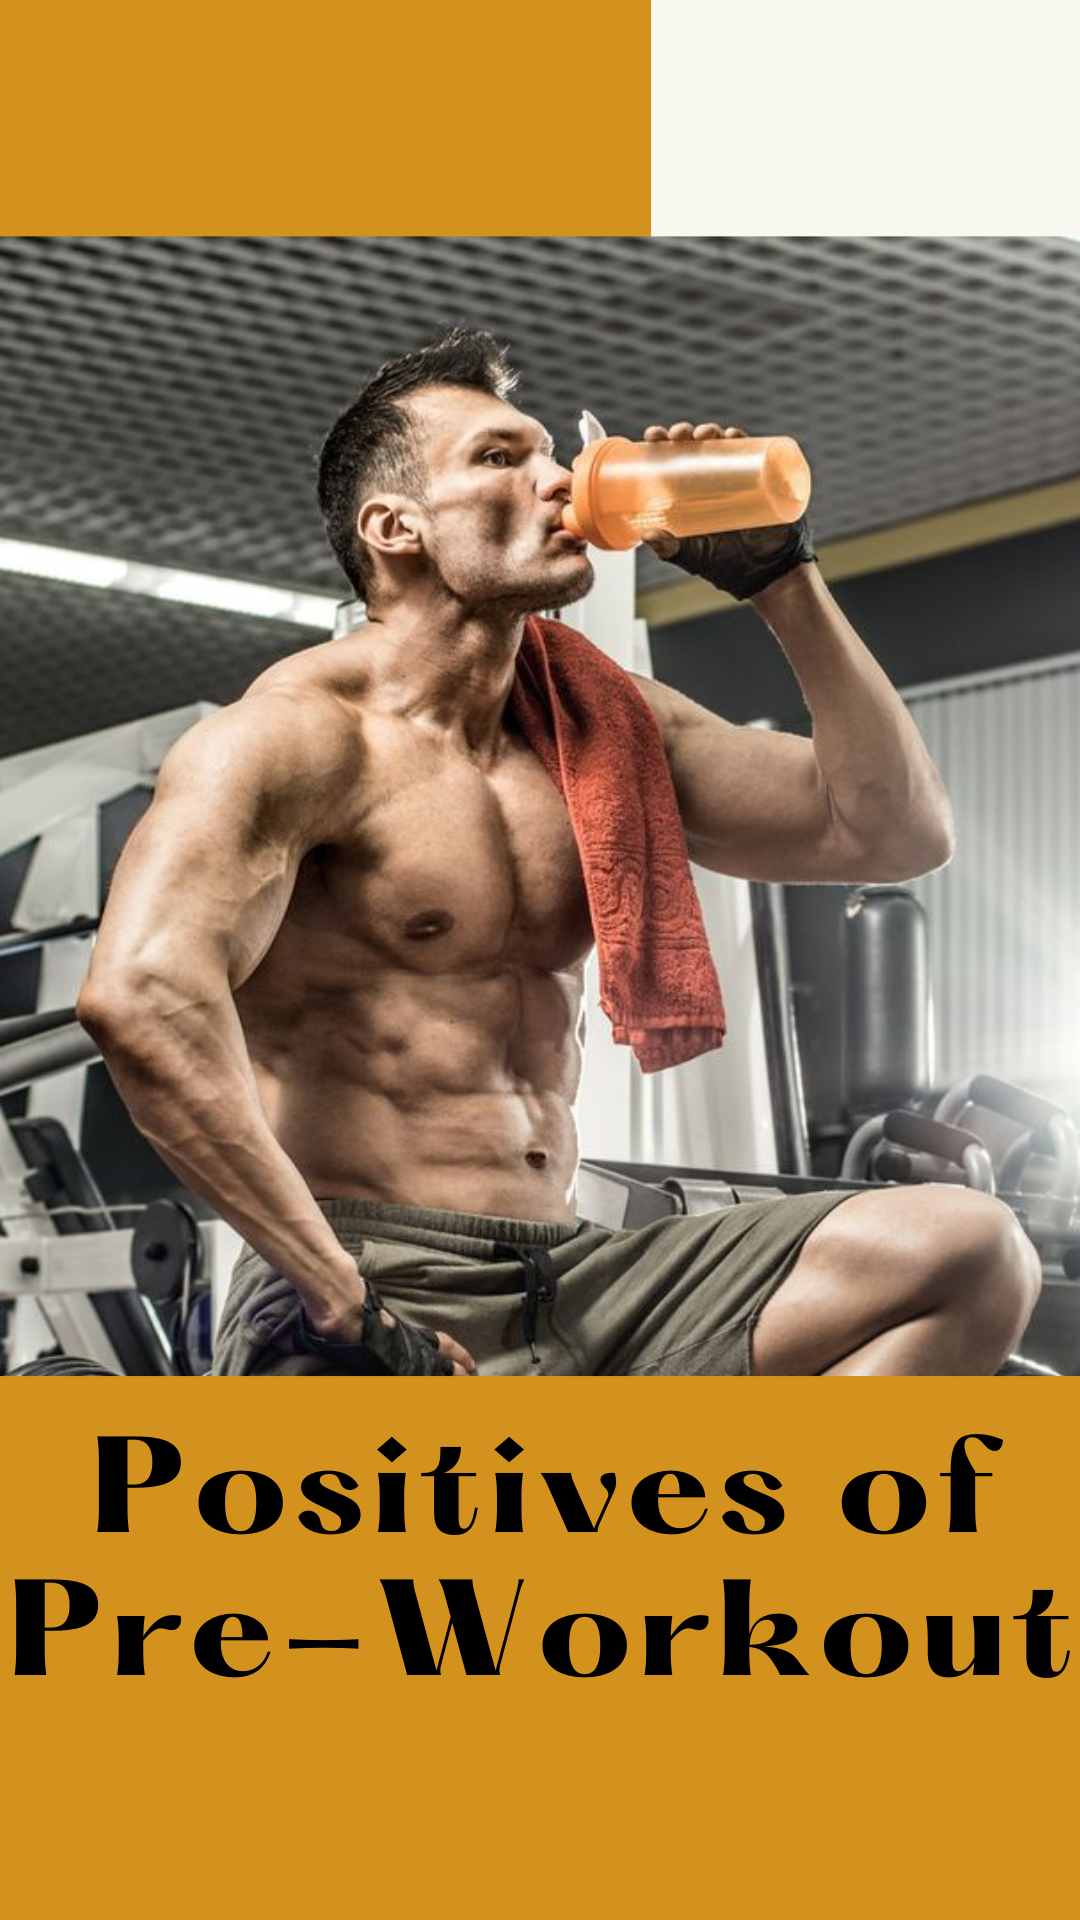 pre-workout things : Positives